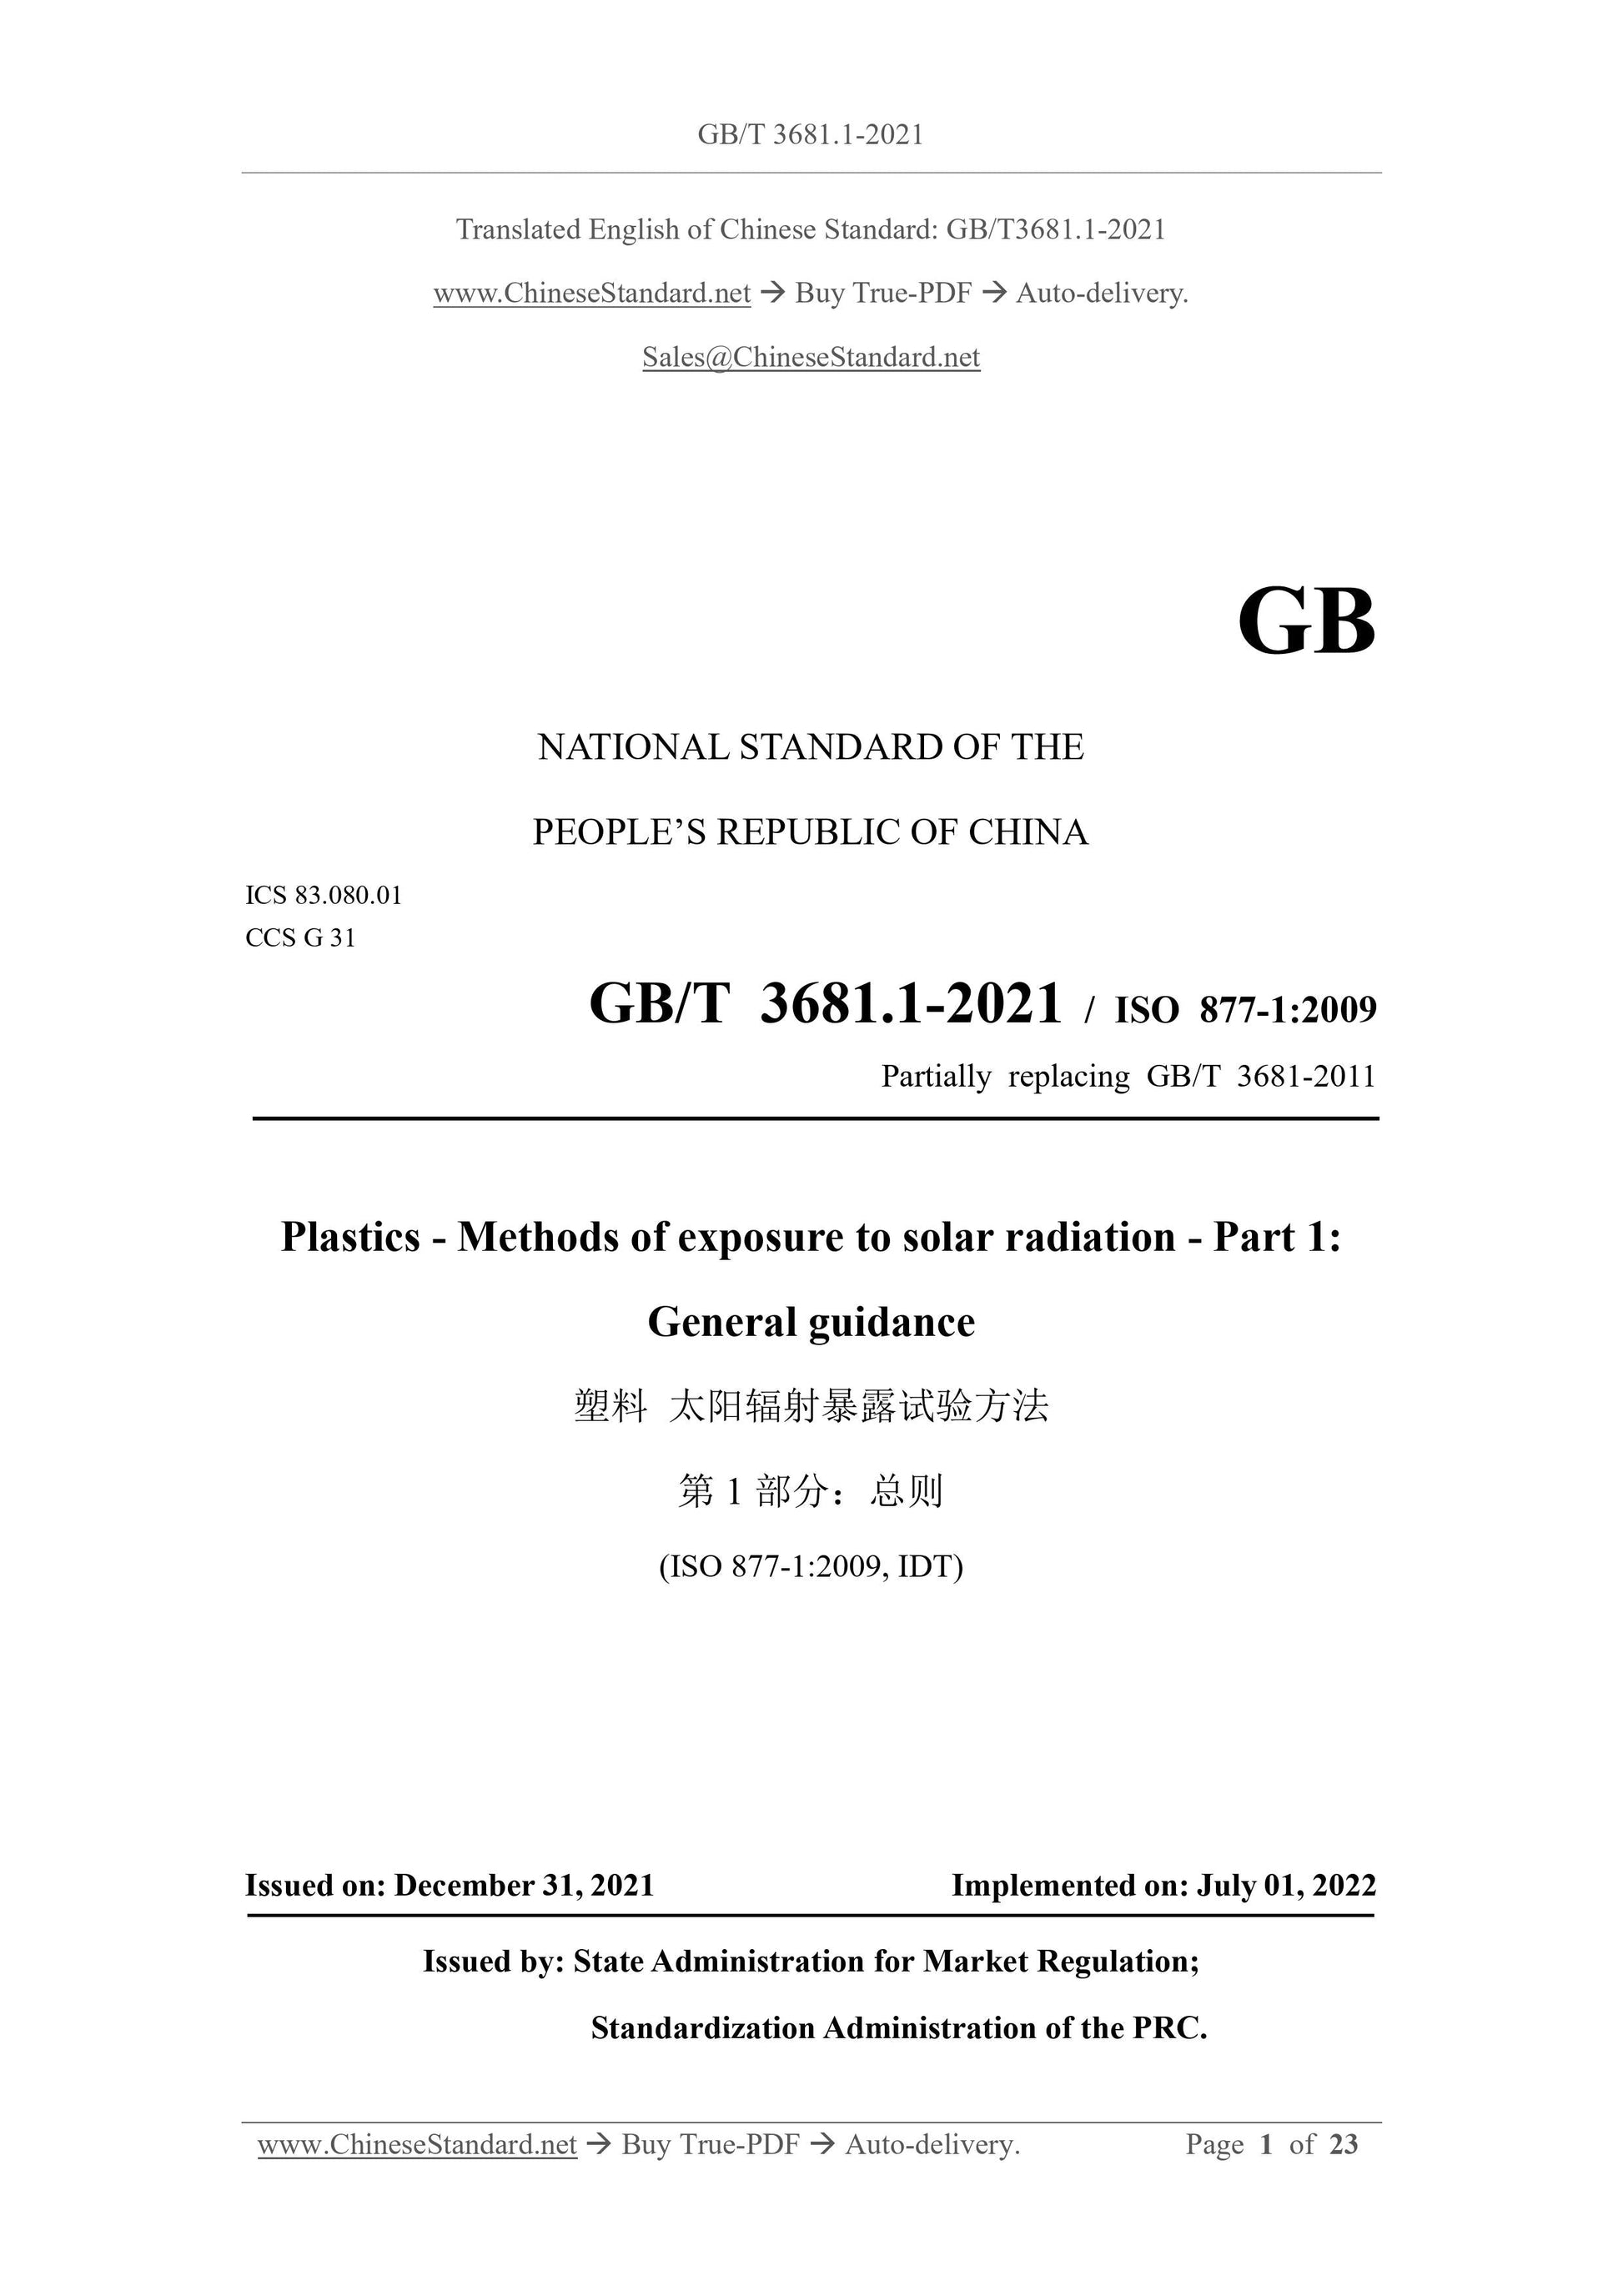 GB/T 3681.1-2021 Page 1